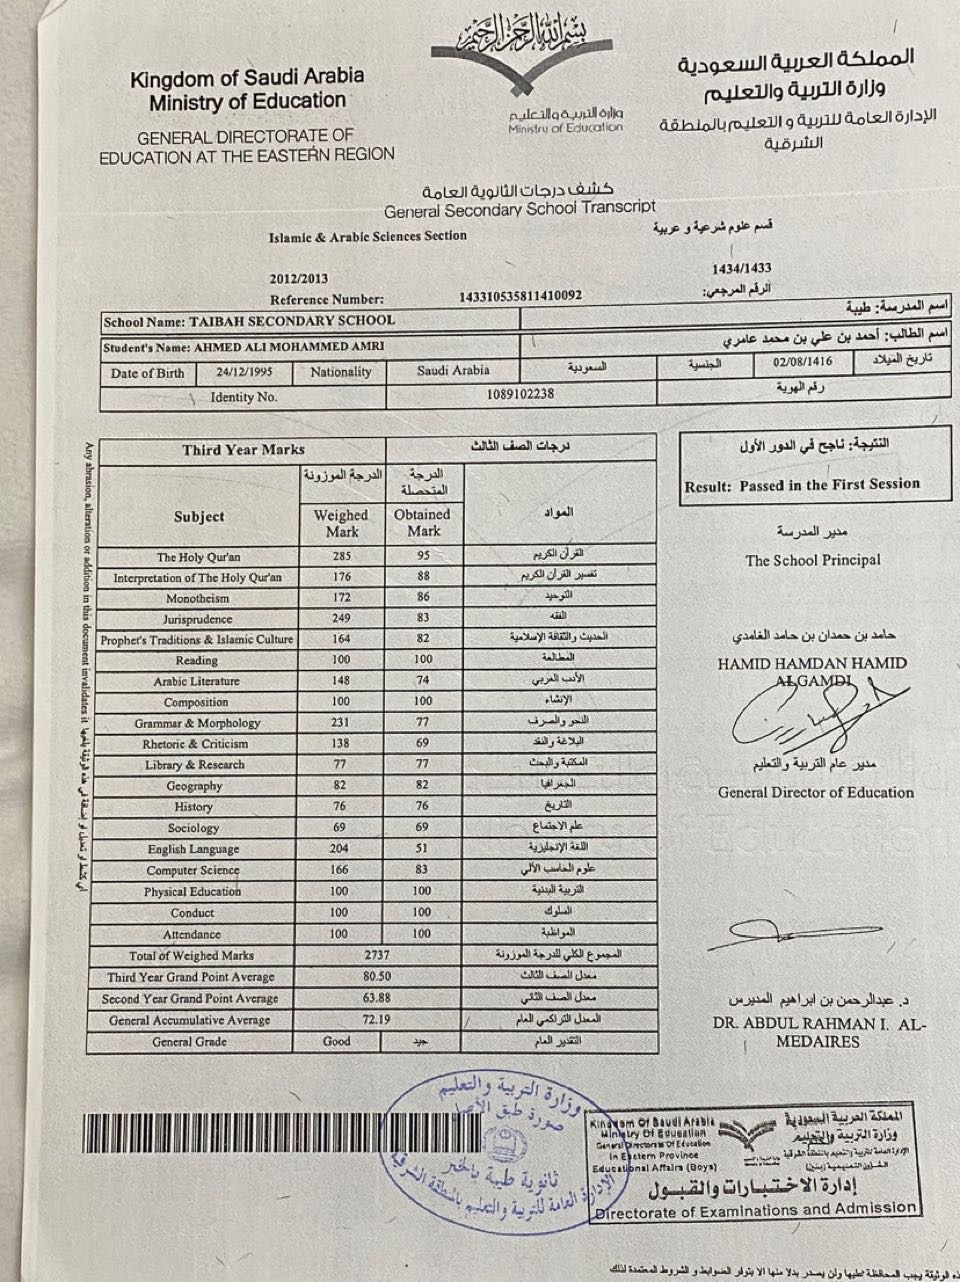 Qag2uul Quel A5loo)!

 

of Saudi Arabia
Ministry of Education (ogl=elig aul 6)l)9
GENERAL DIRECTORATE OF Adhloloulail § QU AoleA oo)!
EDUCATION AT THE EASTERN REGION Le
Qala Ag ilo Lal
Genural Secondary School Transcript

Loamic &amp; Arable Sciences Section Lup ip pre ed

20122013 14341433

Reference Nomber: 143319535811410092 sedated pa y
3 Lo he ph ped

   

 

 

[Schost Name: TAIBAH SECONDARY SCHOOL
—
(Stedents Nome: ARMED ALI MORAMMED AMKI

 

 

 

 

 

    
 
 
 
 
 
  
   
   

 

Duel Bed | 121m oa
l | Idemty No 1389102238 | Aw
[ Third Year Marks XB ad hp

 

The School Priacipal

 

$43 dd ram phe
HAMID BAMDAN HAMID
MERRY \
Cs
ads 2 pa pee
General Director of Education

 

 

 

 

 

 

 

Dad pad Gr pan Jae a
DR. ABDUL RAHMAN. AL-

 
   

oo Wk bes
nil RW

Jomdly Dy lui&gt; 313503)

   

nd by 0 pnd pe We Vy ng at Aad my £4